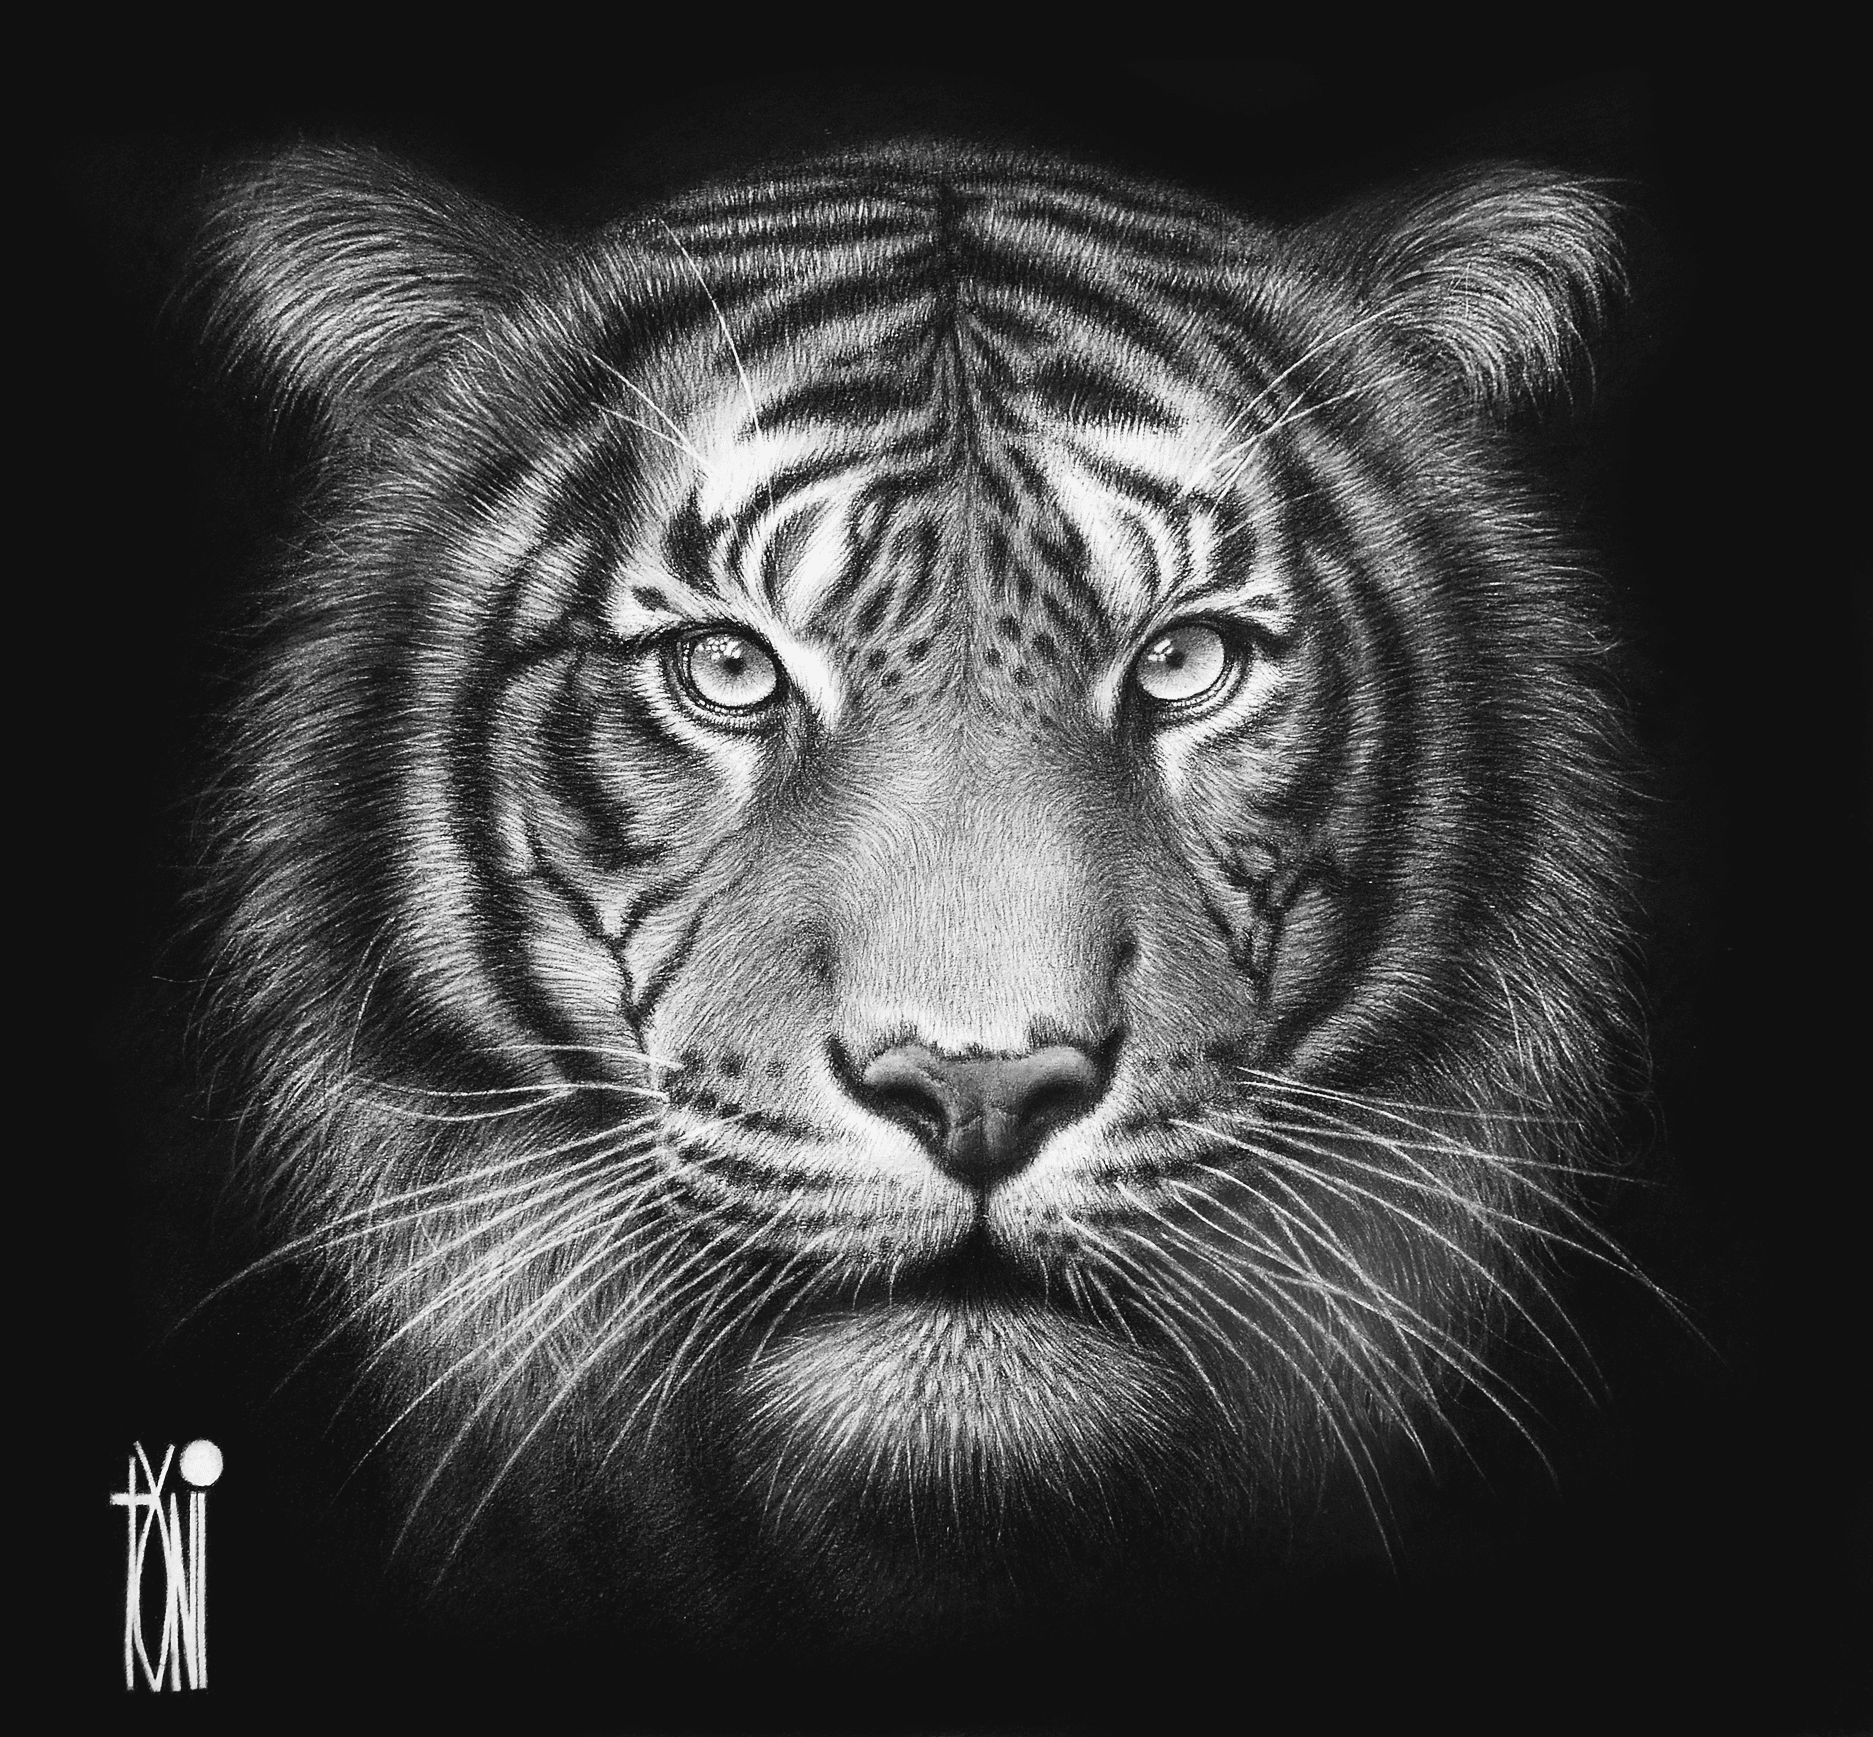 pencil drawing of a tiger face